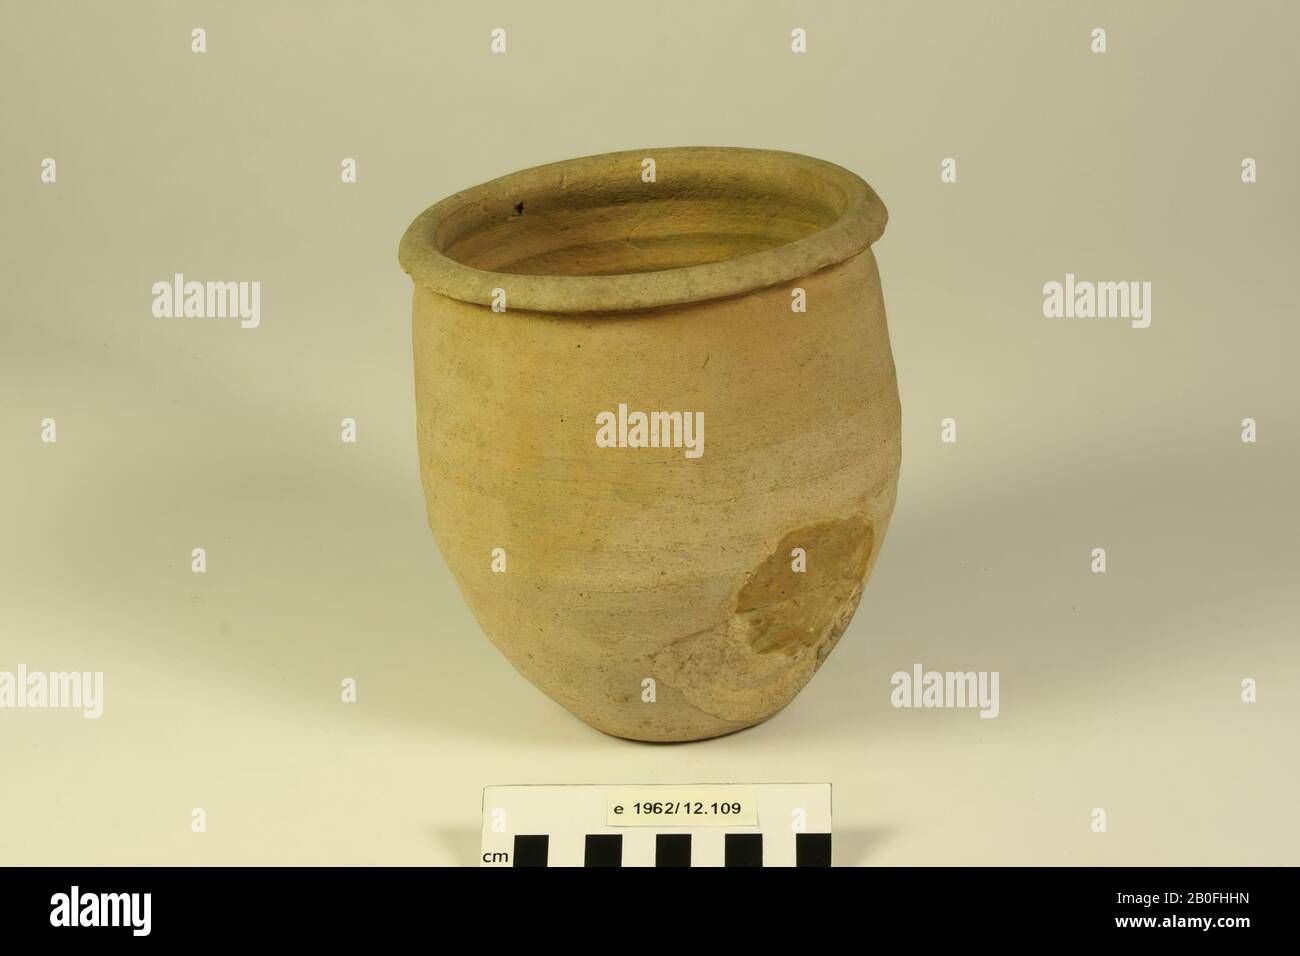 Wide-mouthed urn of imported turntable pottery. Old addition. Contains cremated residues, urn, pottery (Mayen), h: 16 cm, diam: 15 cm, vmeb, The Netherlands, Gelderland, Wageningen, Wageningen Stock Photo